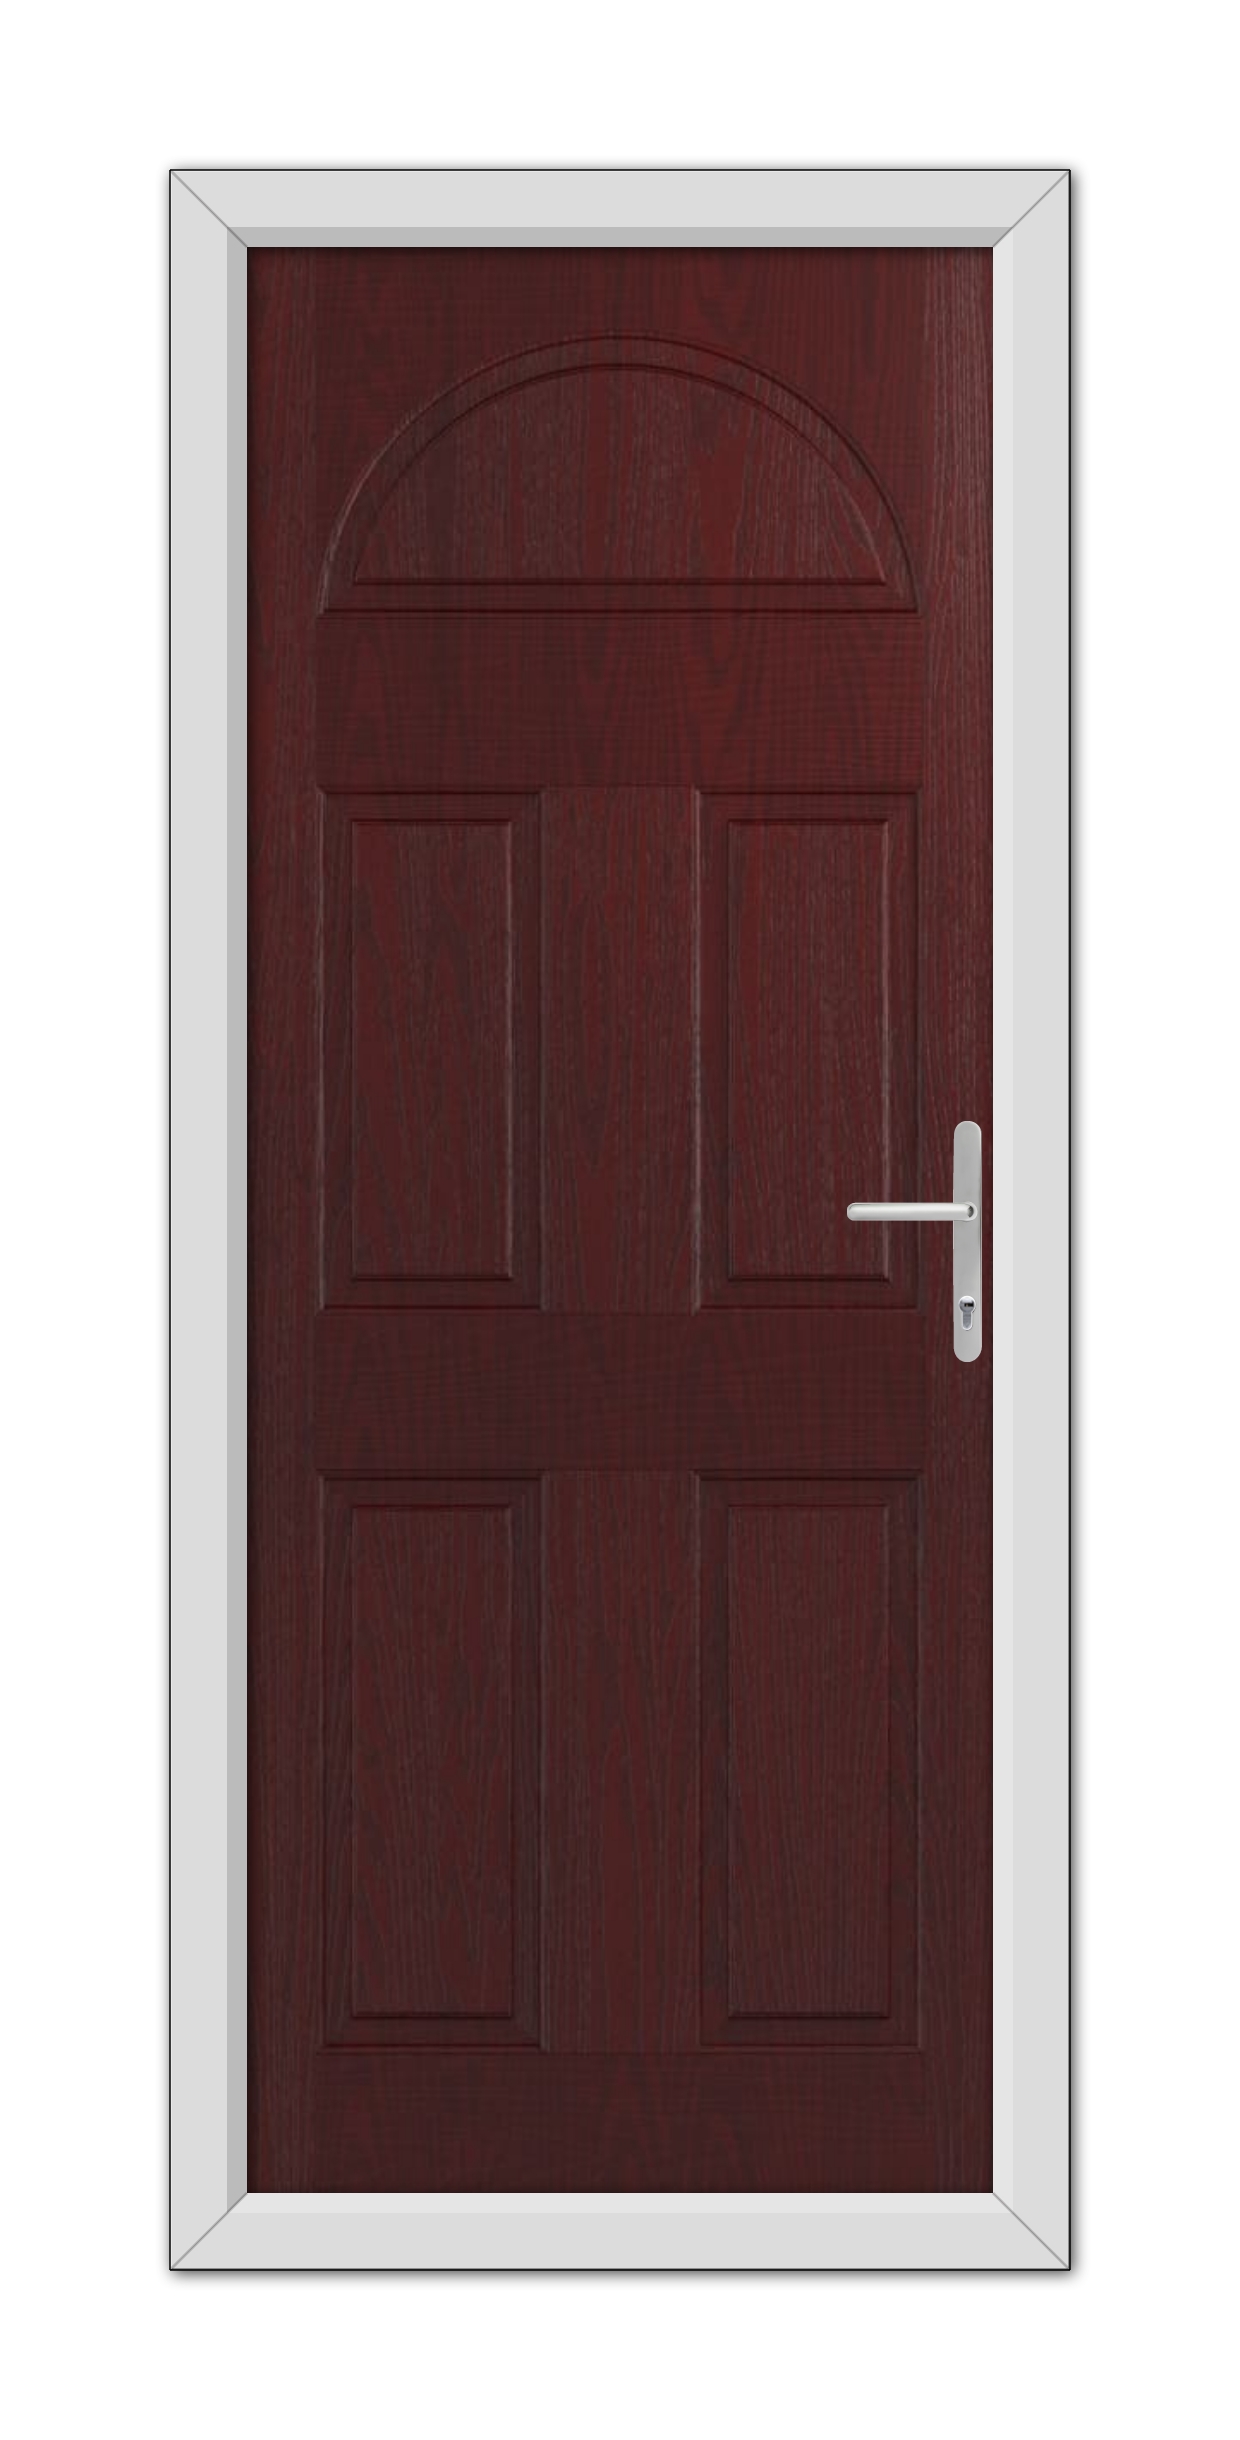 A closed Rosewood Middleton Solid Stable Composite Door 48mm Timber Core with six panels and a white metal handle, set within a white door frame.